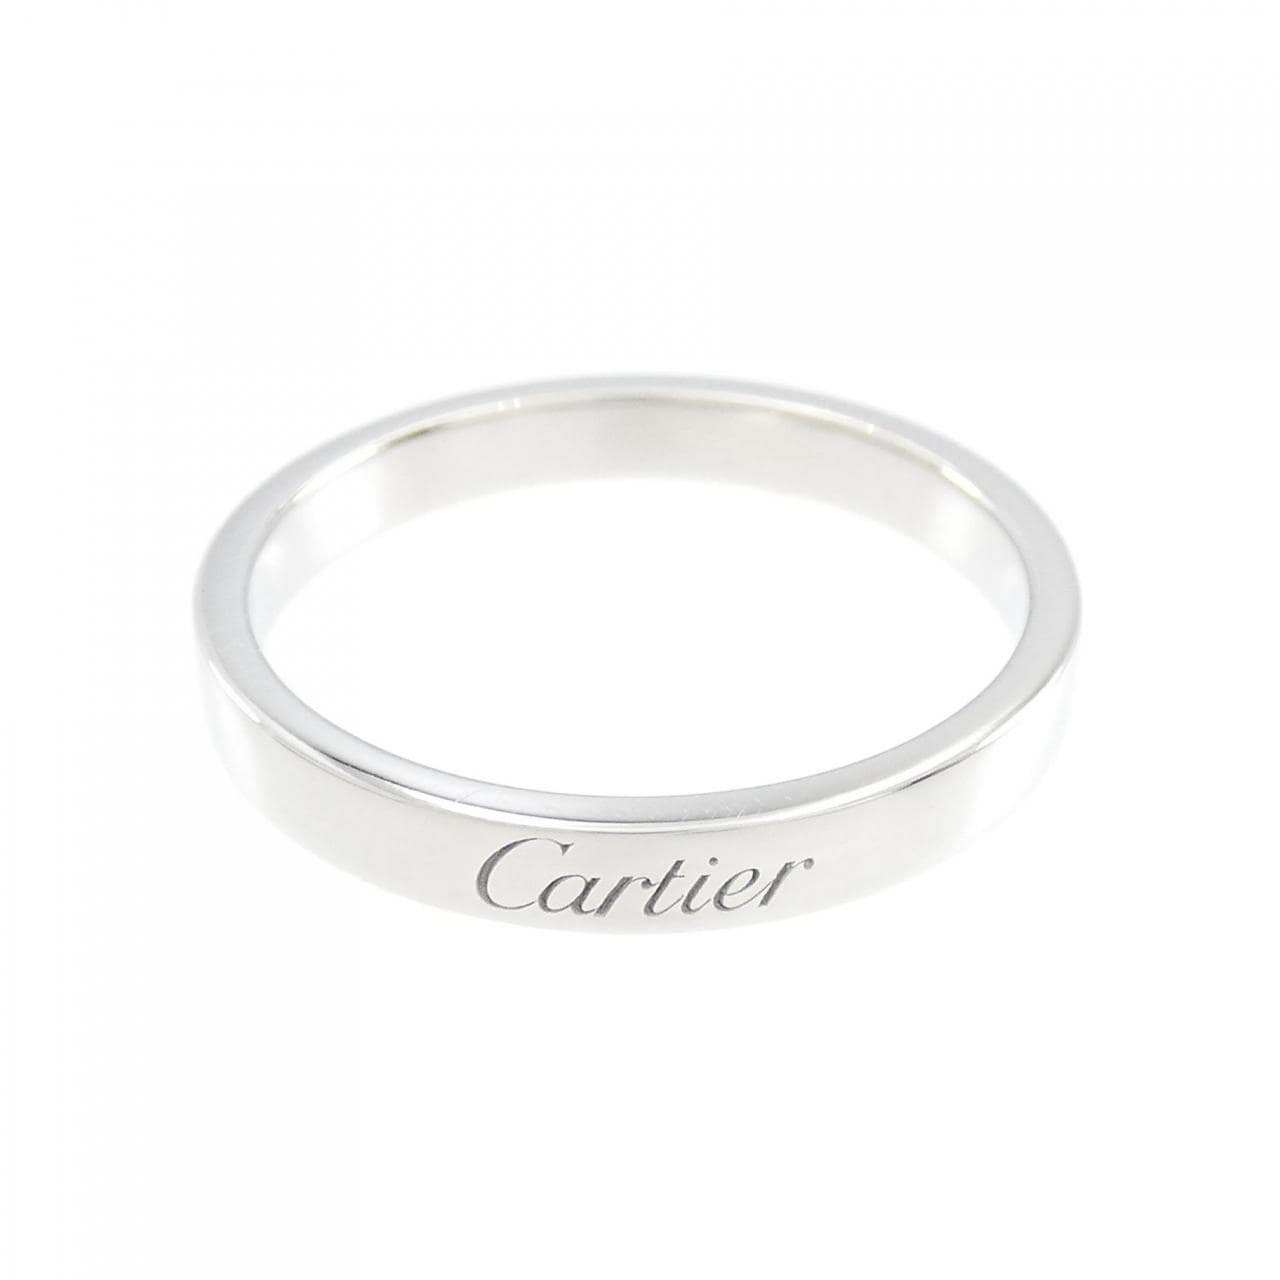 Cartier engraved ring